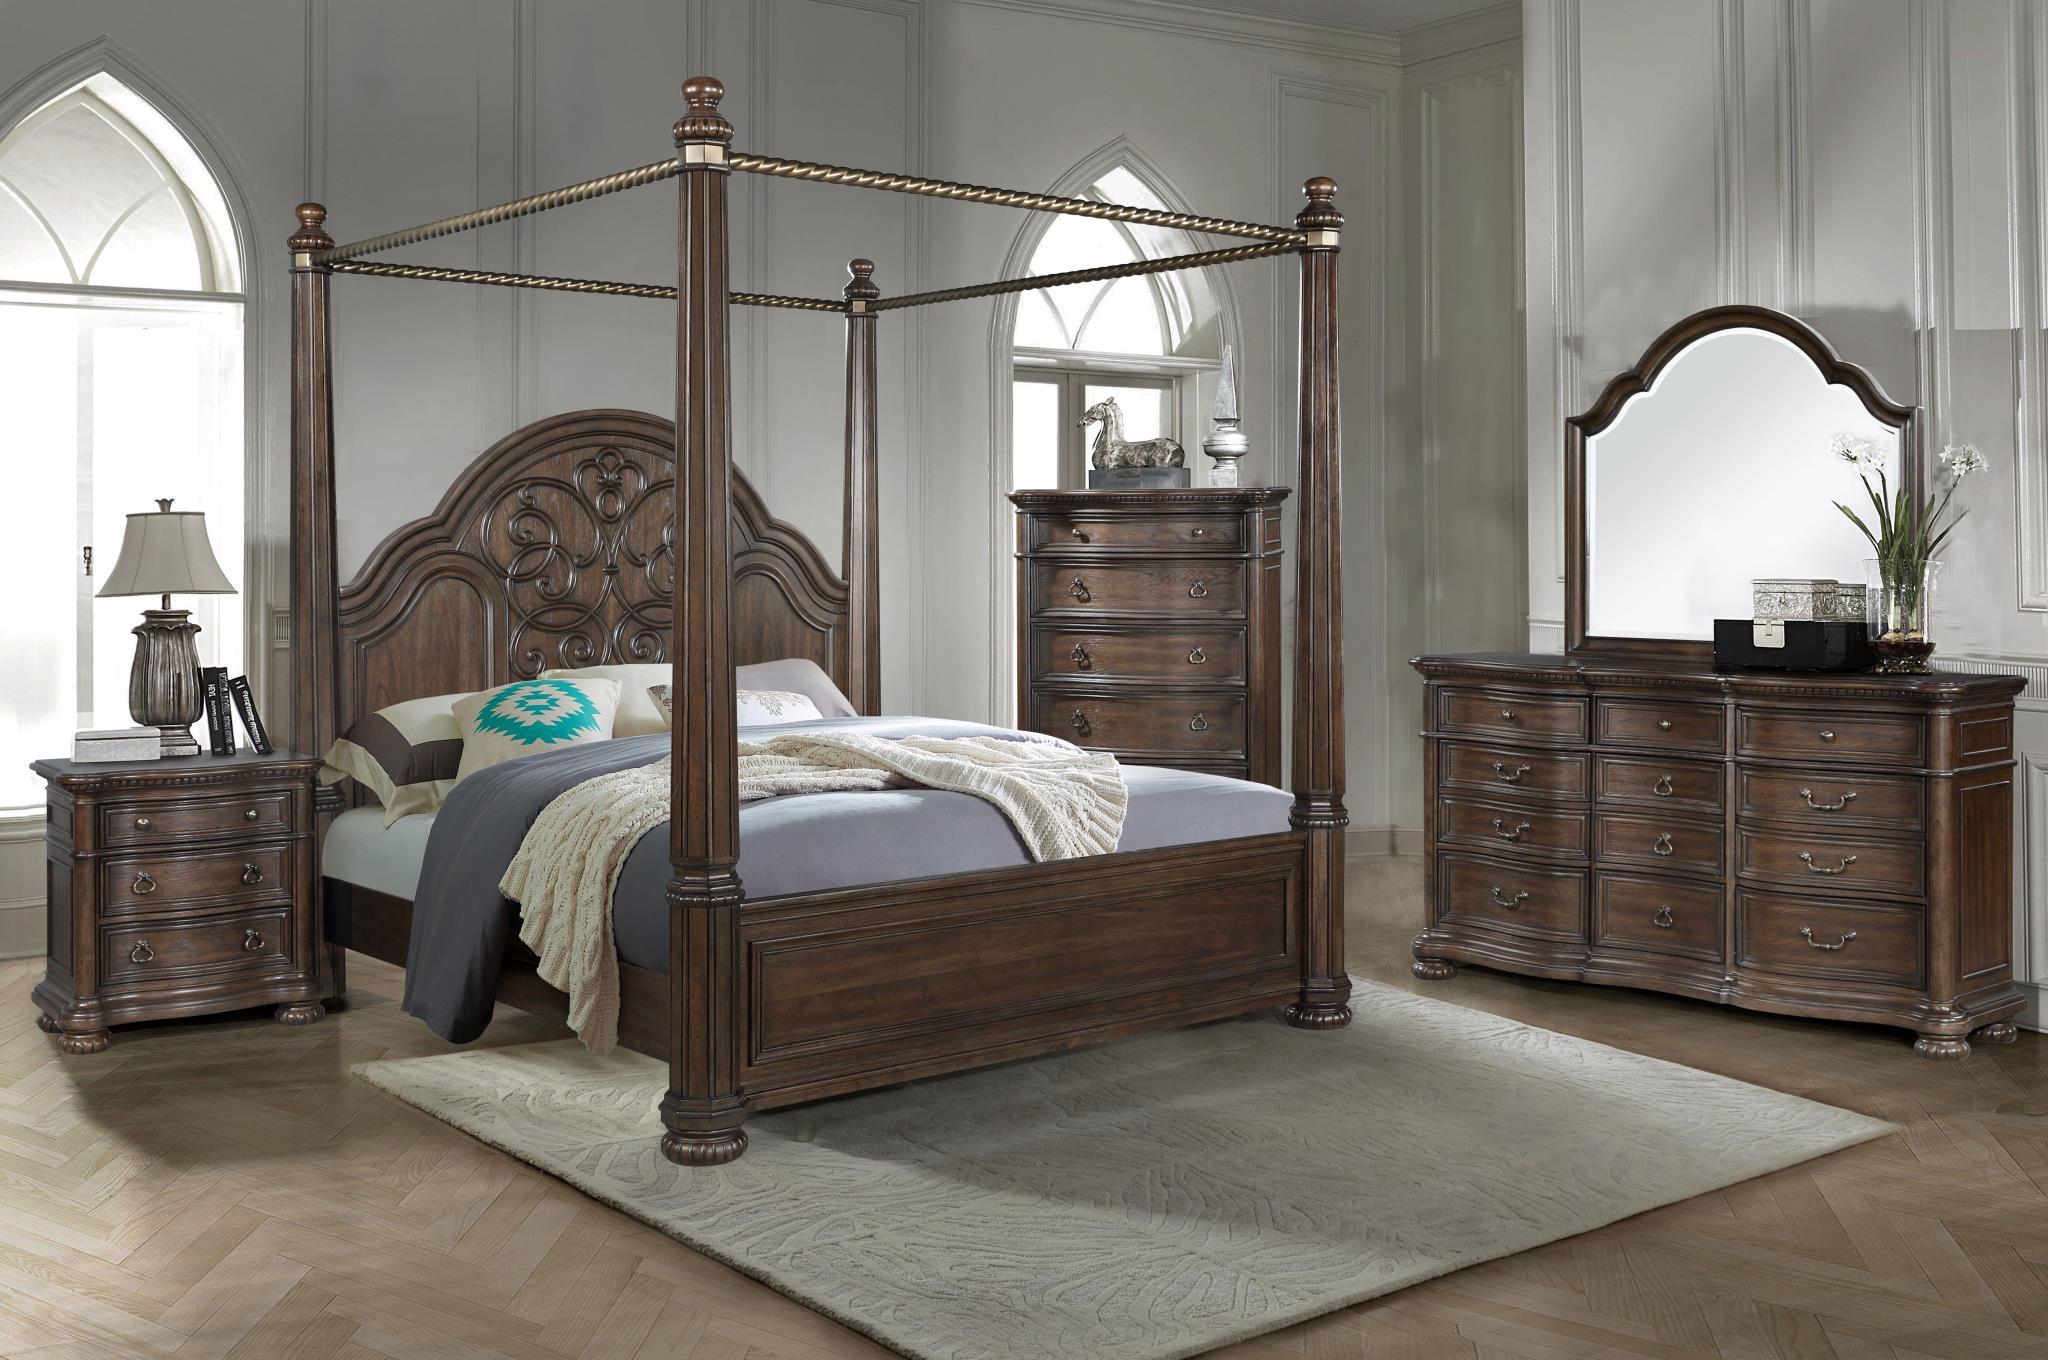 Contemporary, Traditional Bedroom Set TUSCANY 321-108-Set-6 321-108-2NDMC-6PC in Brown 